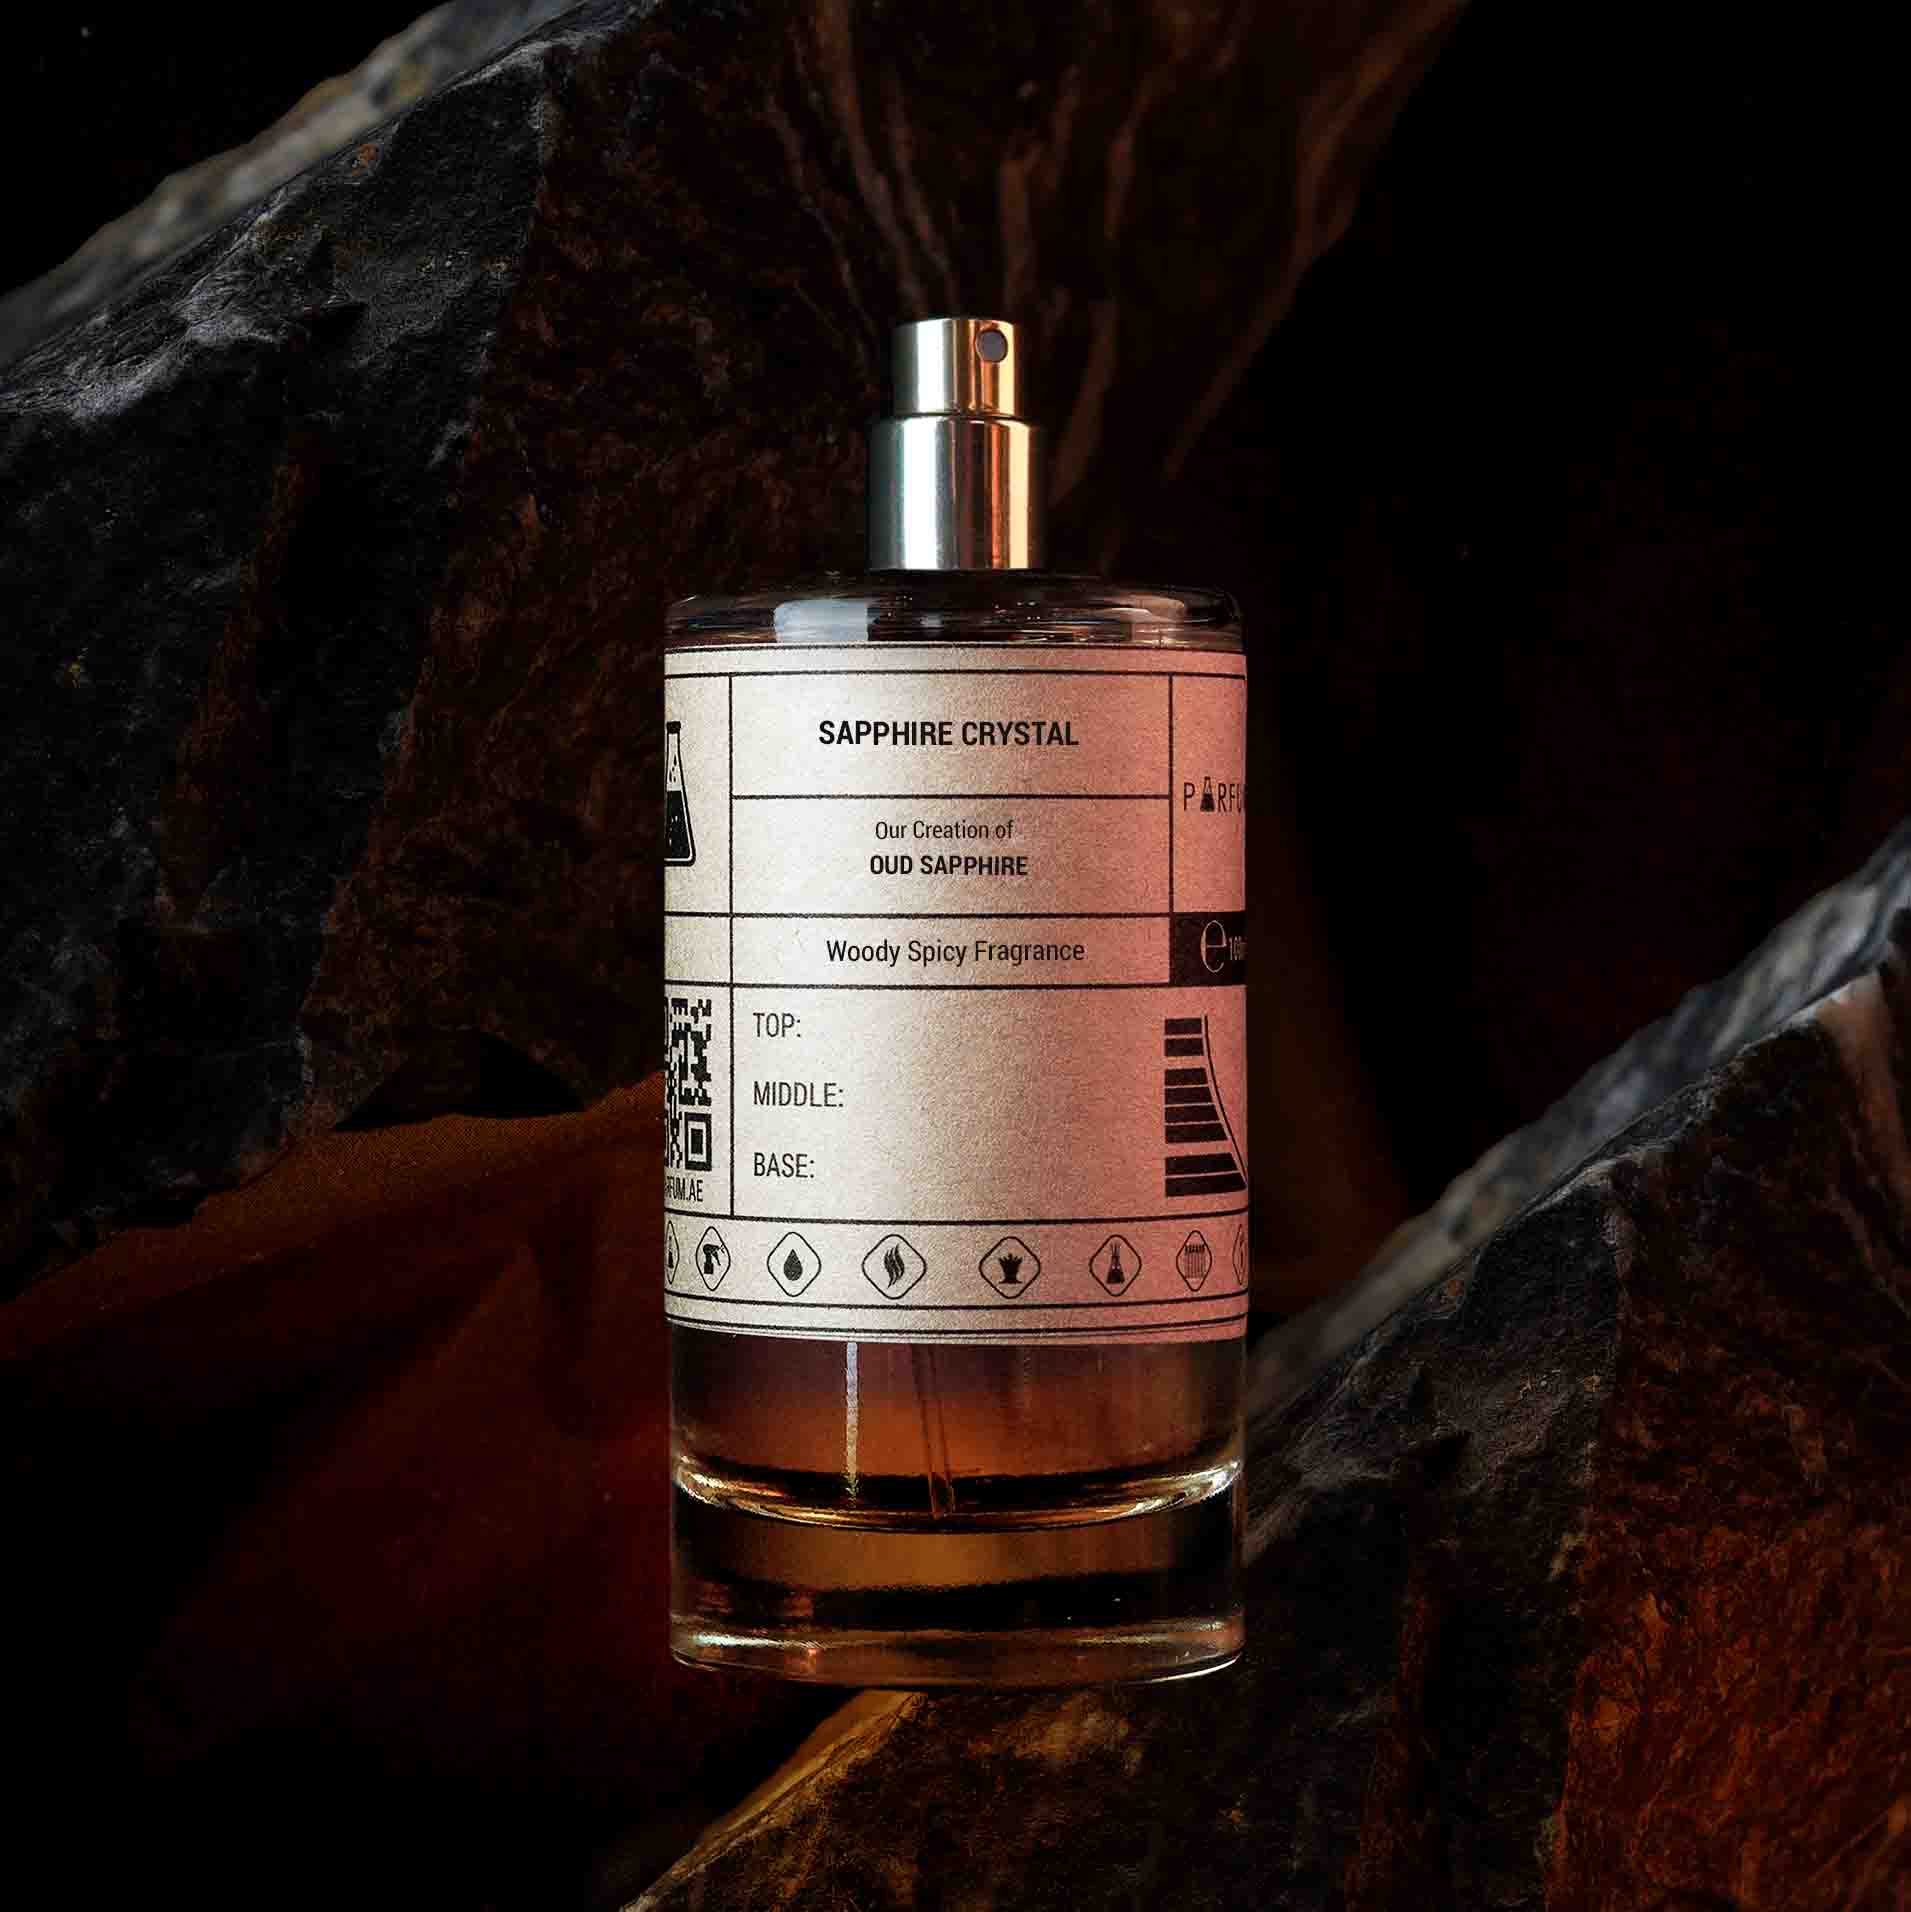 Our Creation of Boadicea the Victorious' Oud Sapphire